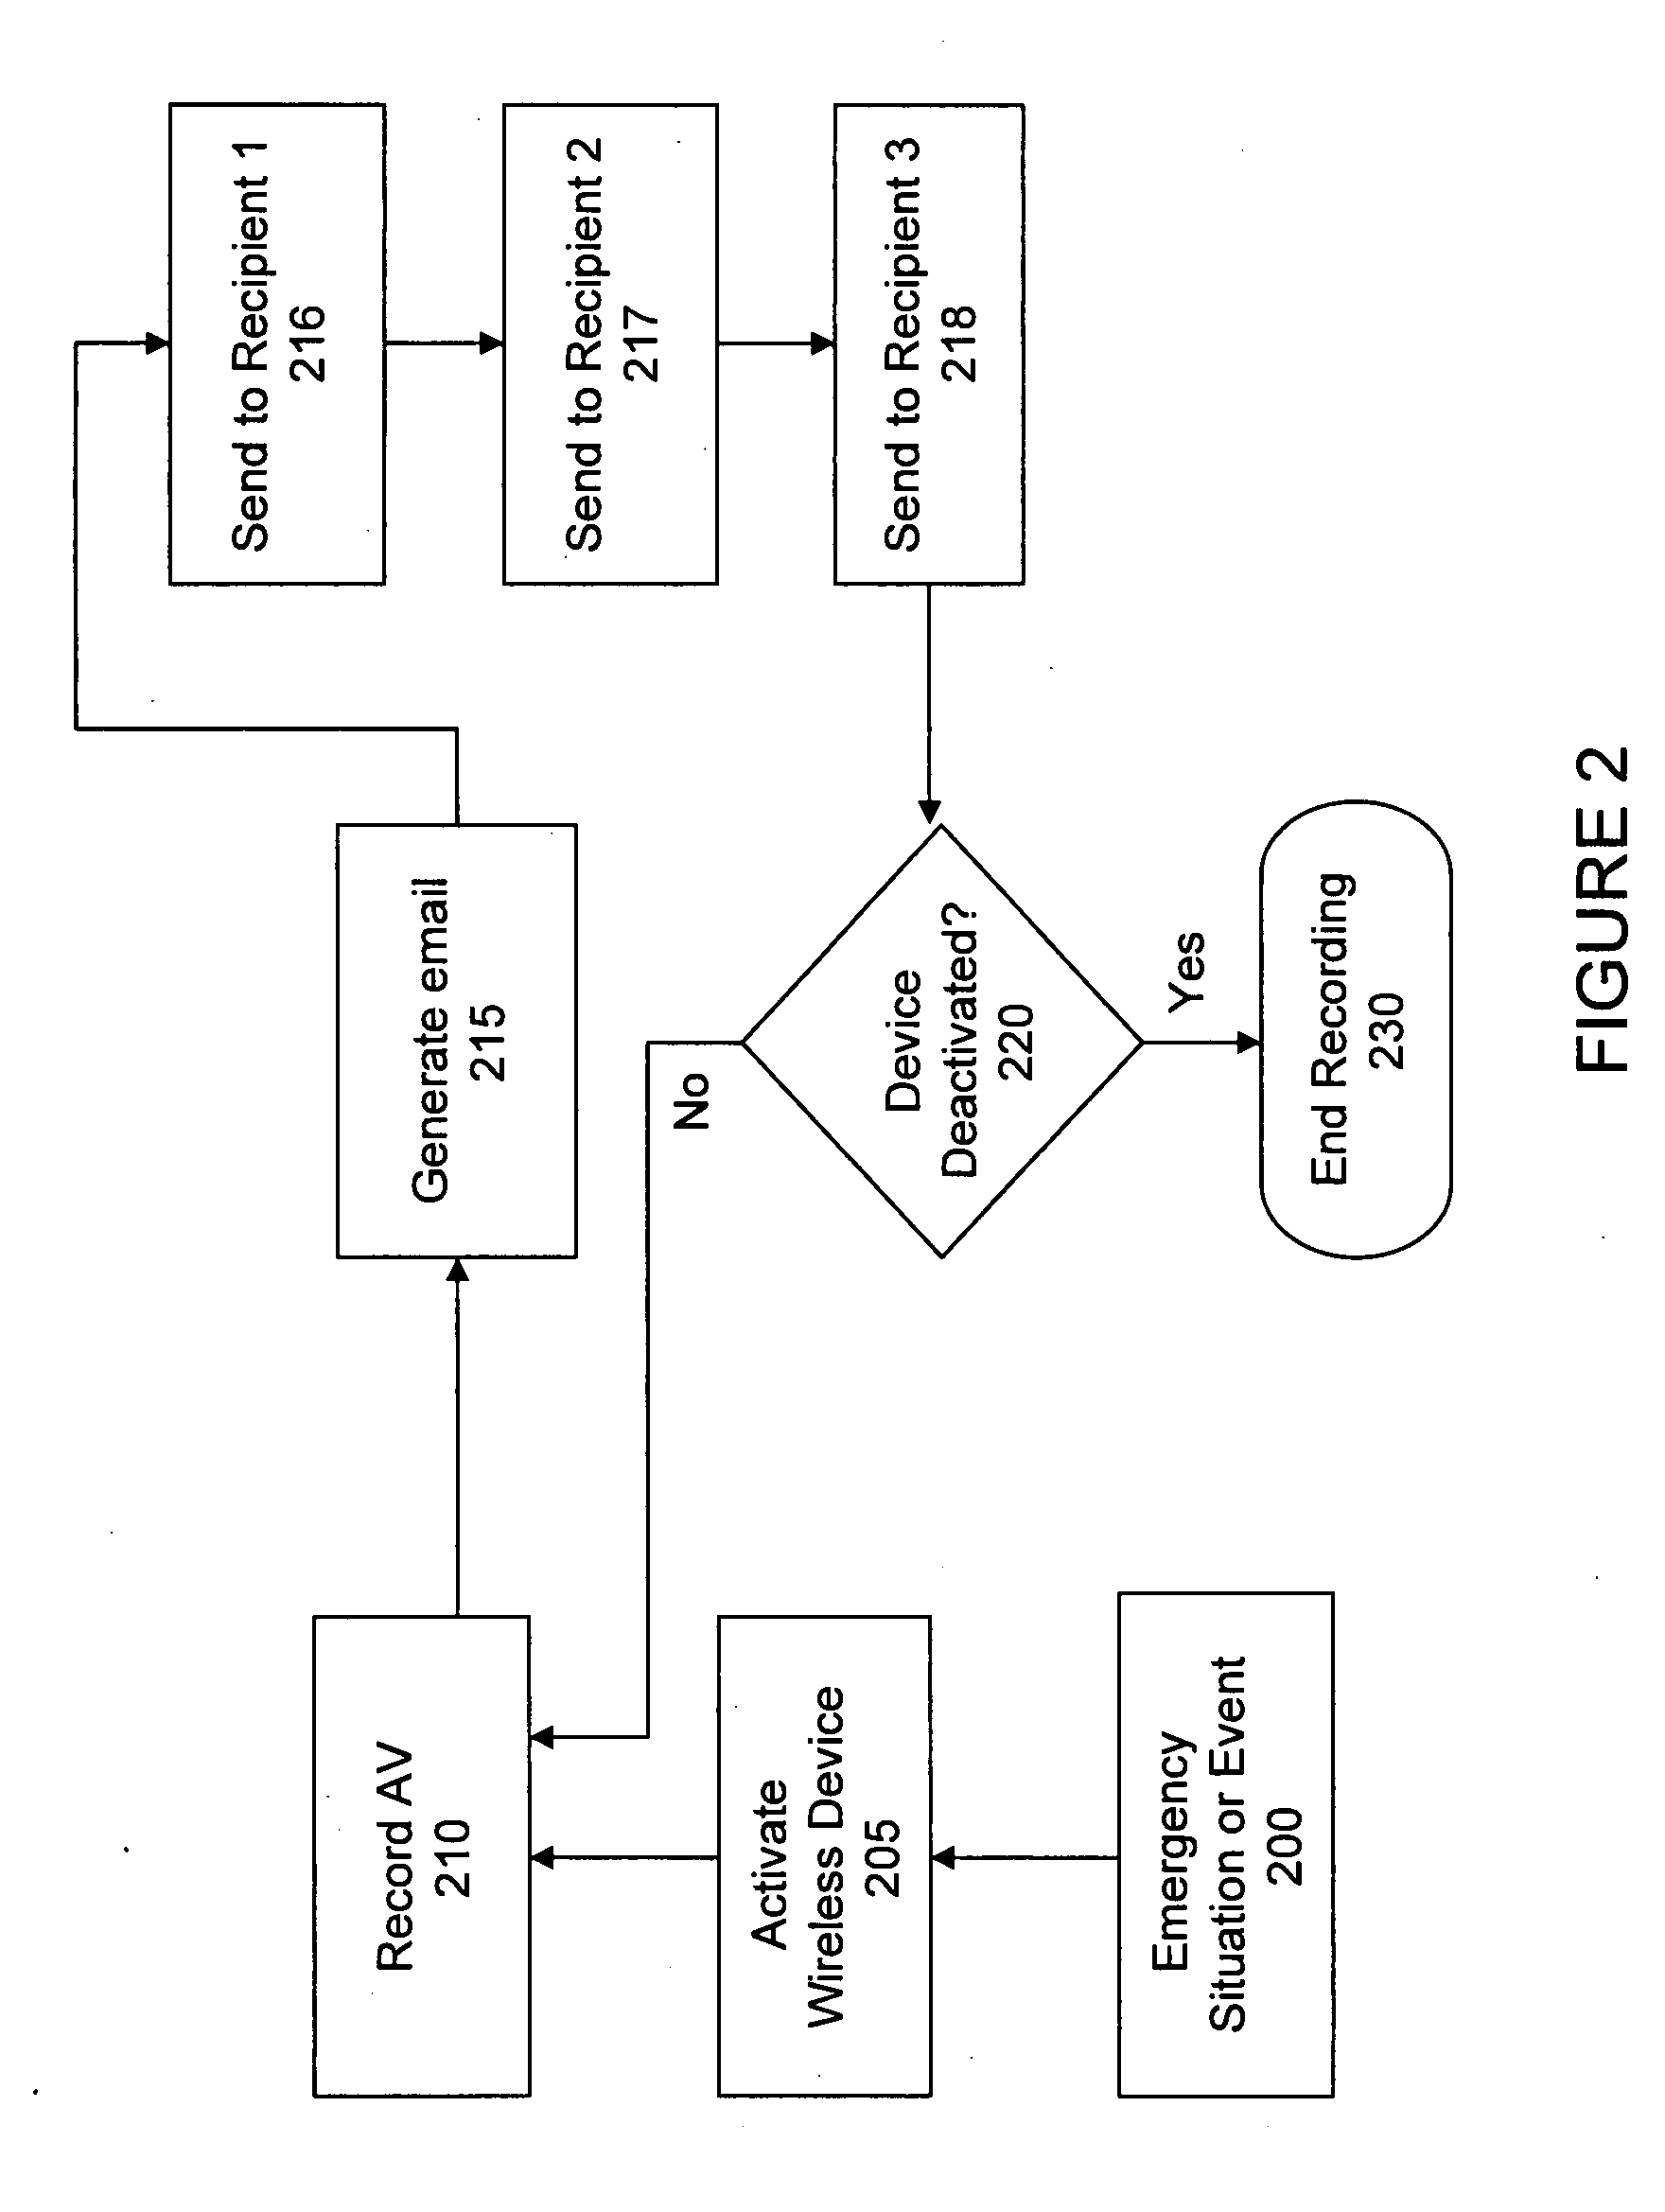 Process and system for automatically transmitting audio/video content from an electronic device to desired recipient(s)